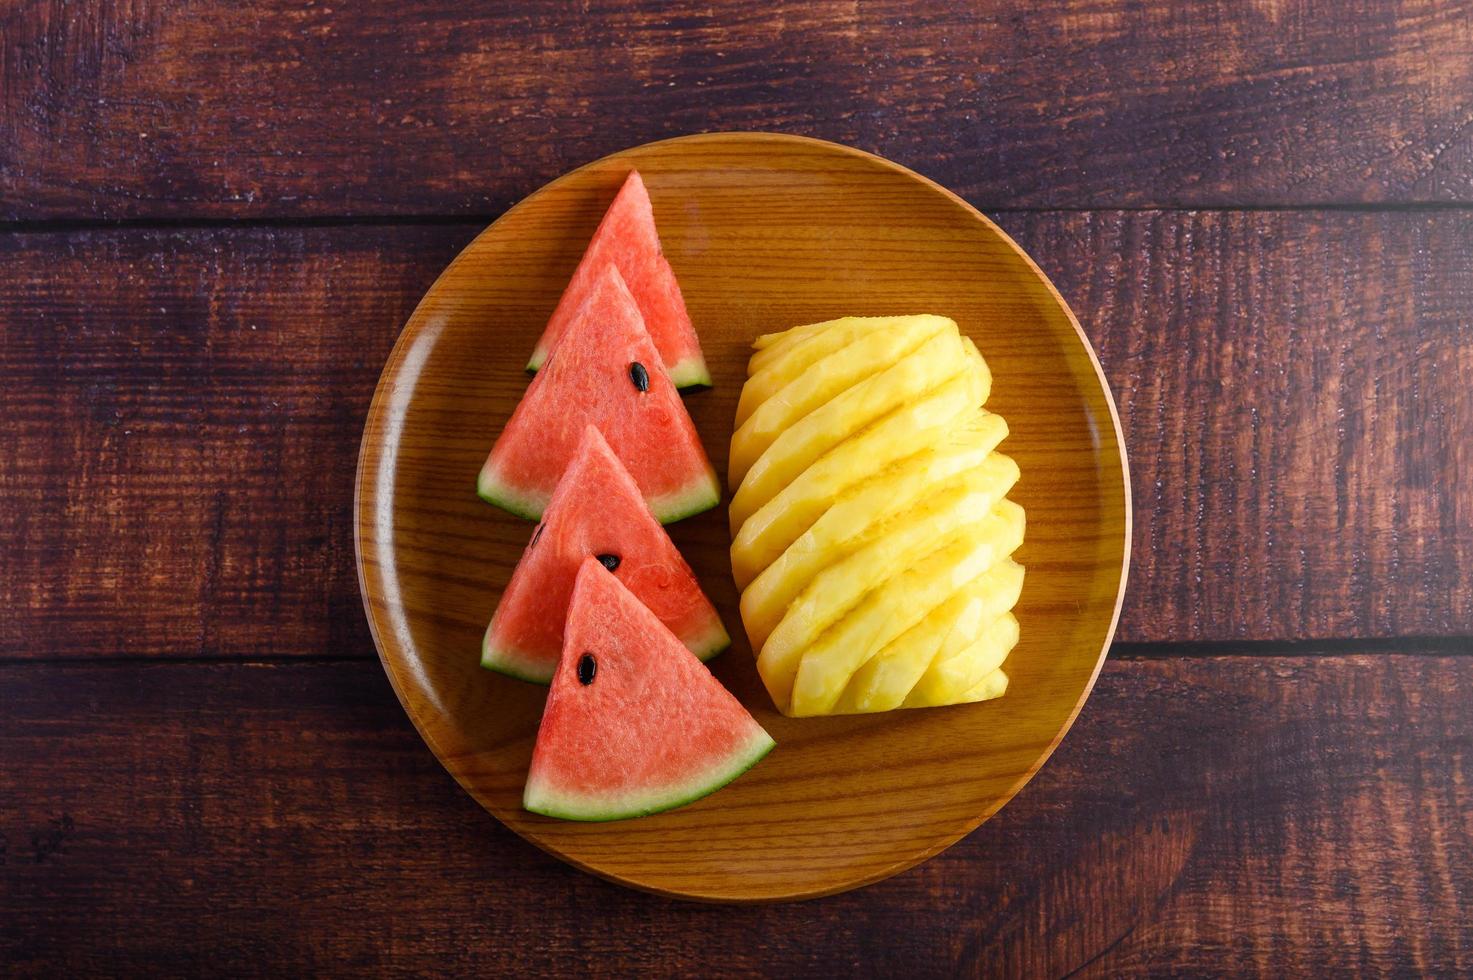 Watermelon and pineapple slices on dark wooden table photo